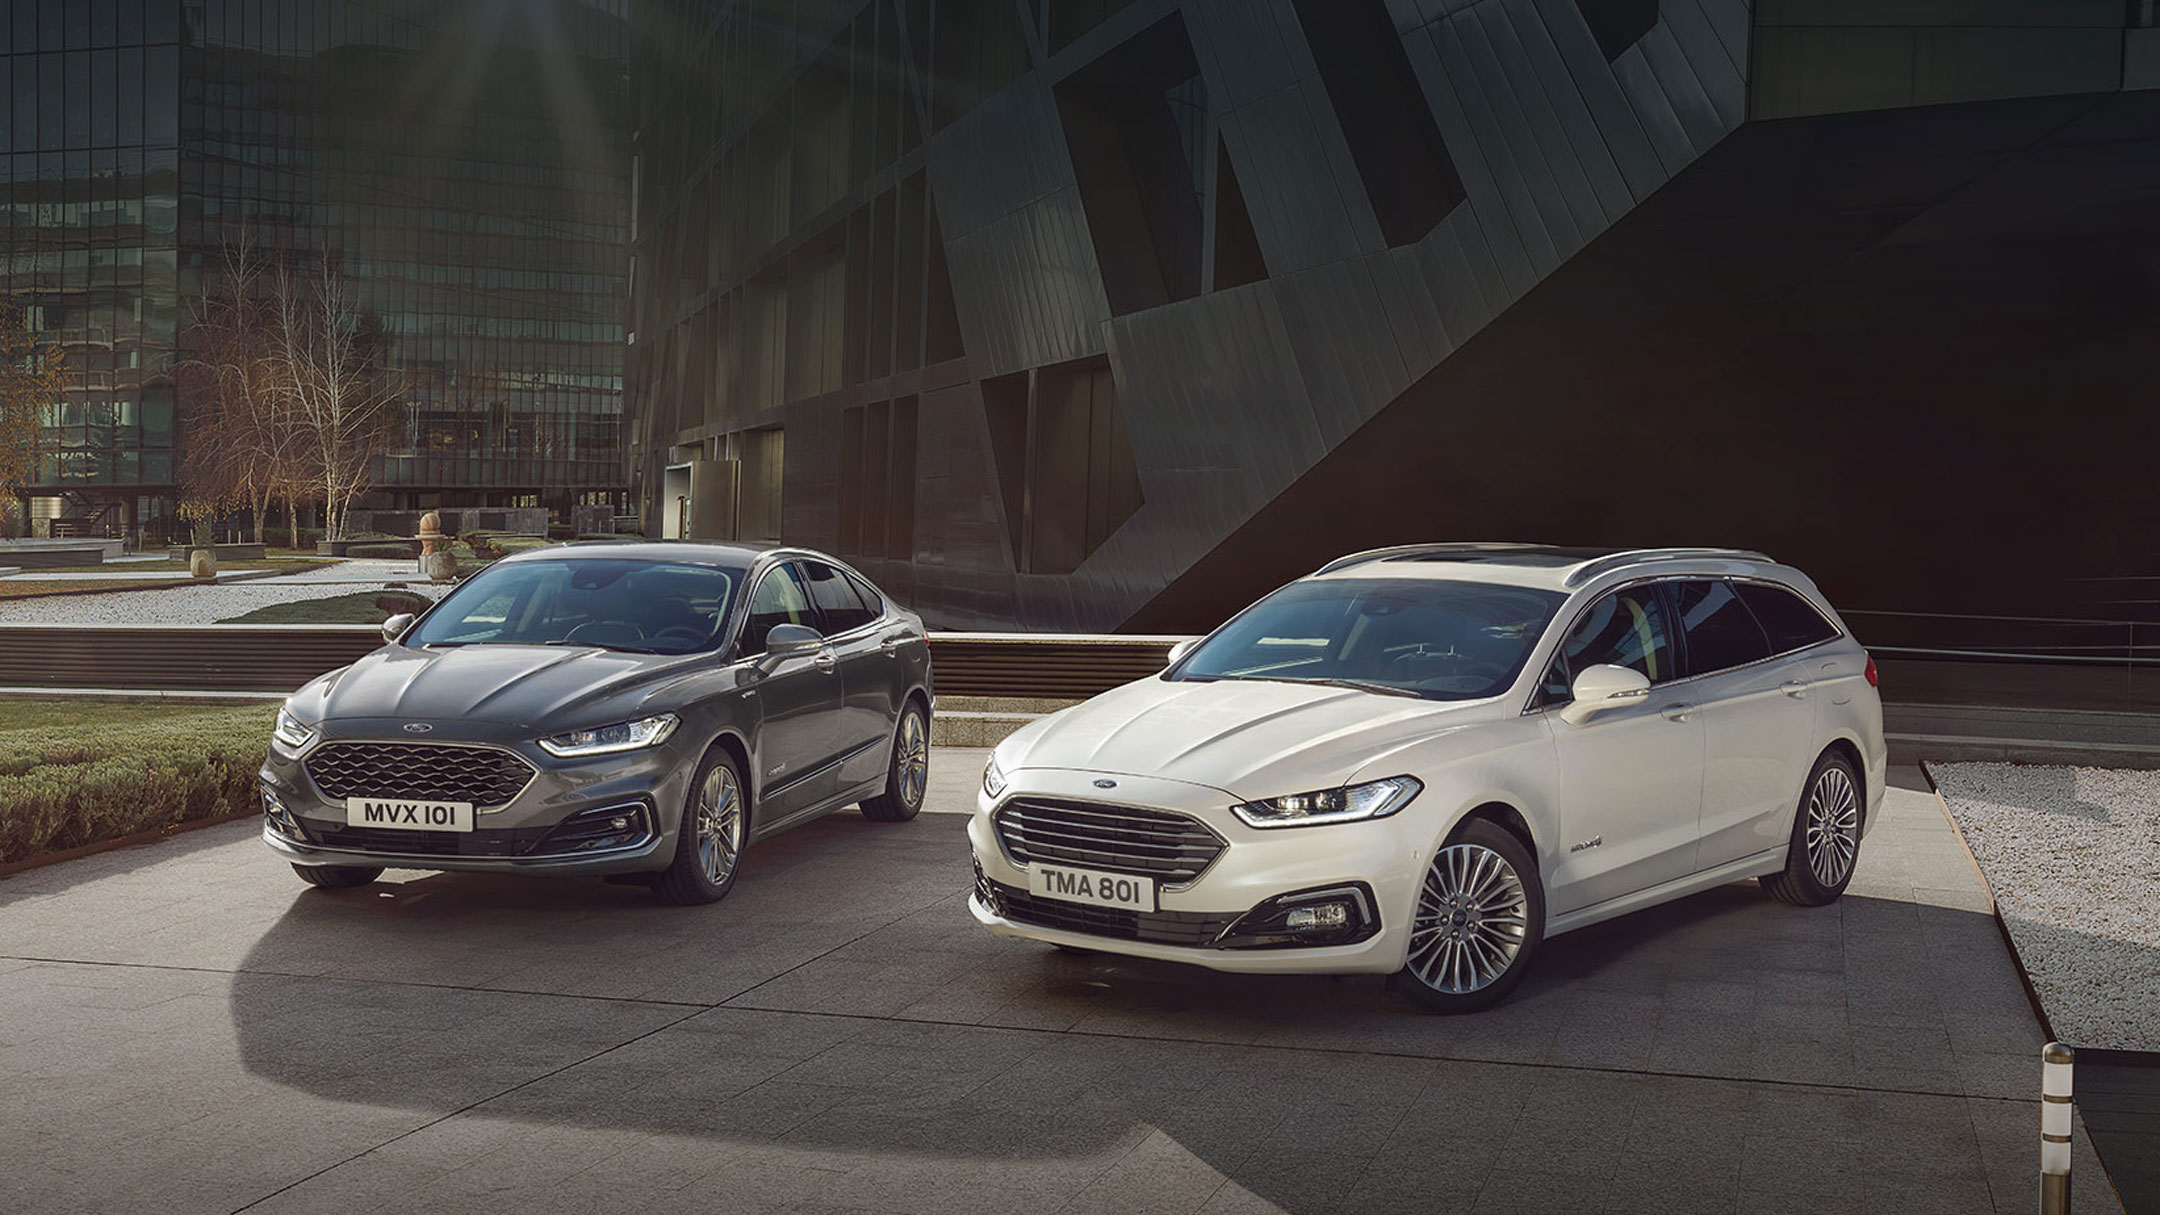 Dark and White Ford Mondeo parking in front of modern concrete building